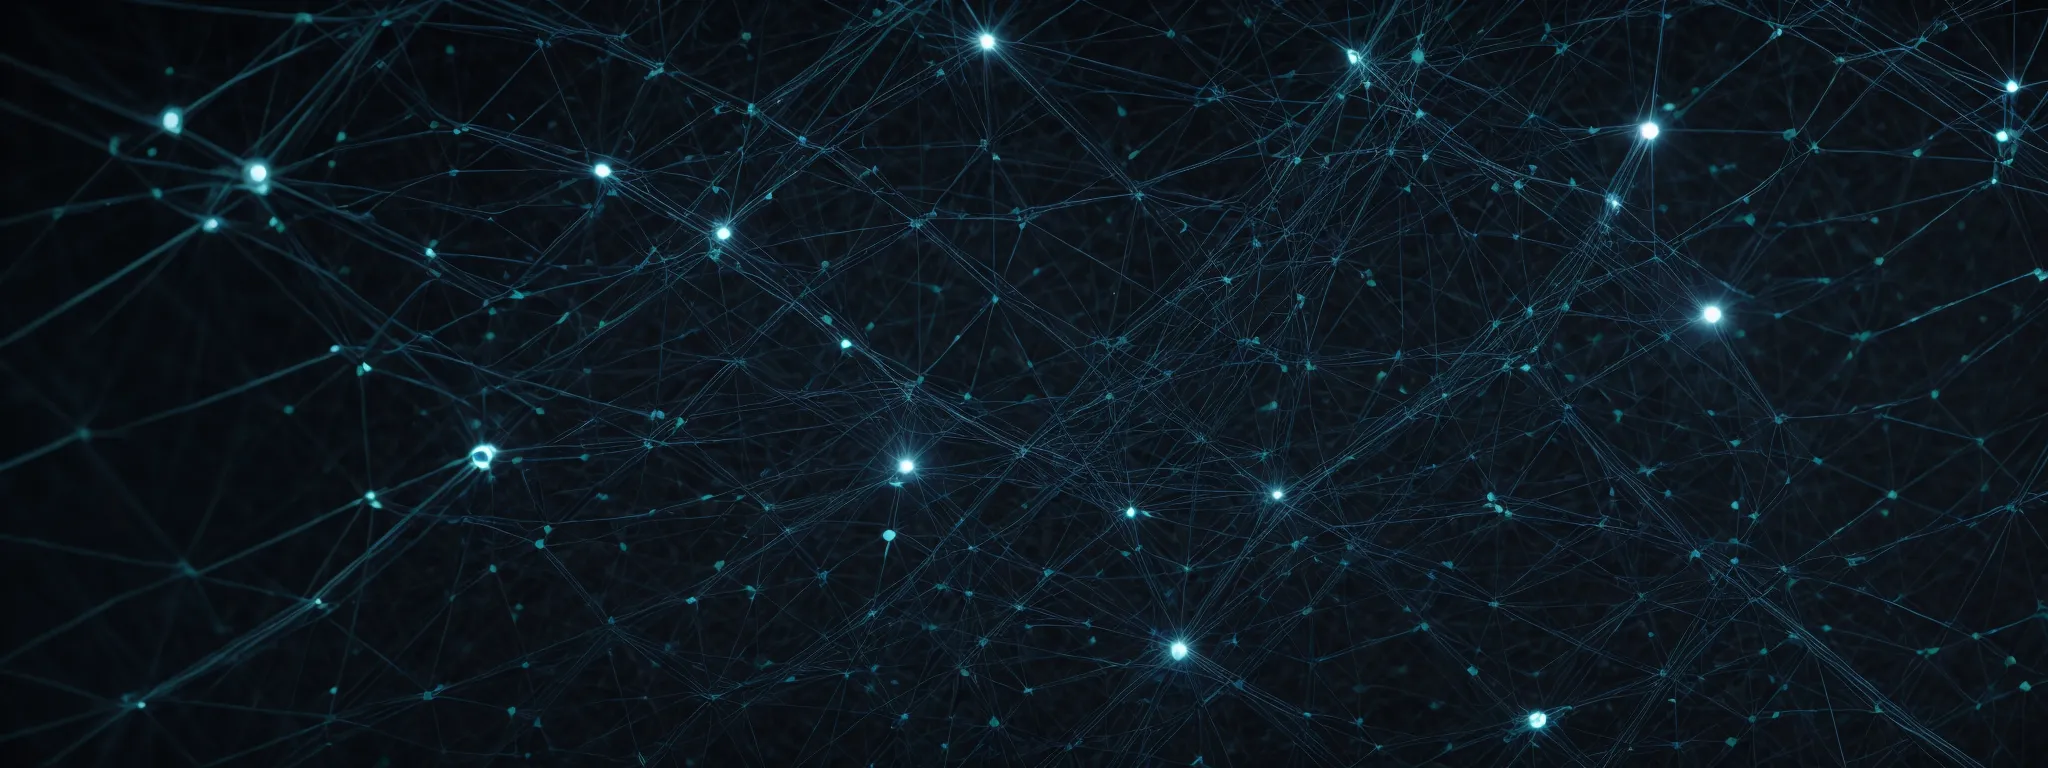 a network of interconnected nodes with some highlighted as larger and more prominent, symbolizing influential connections in a digital web.